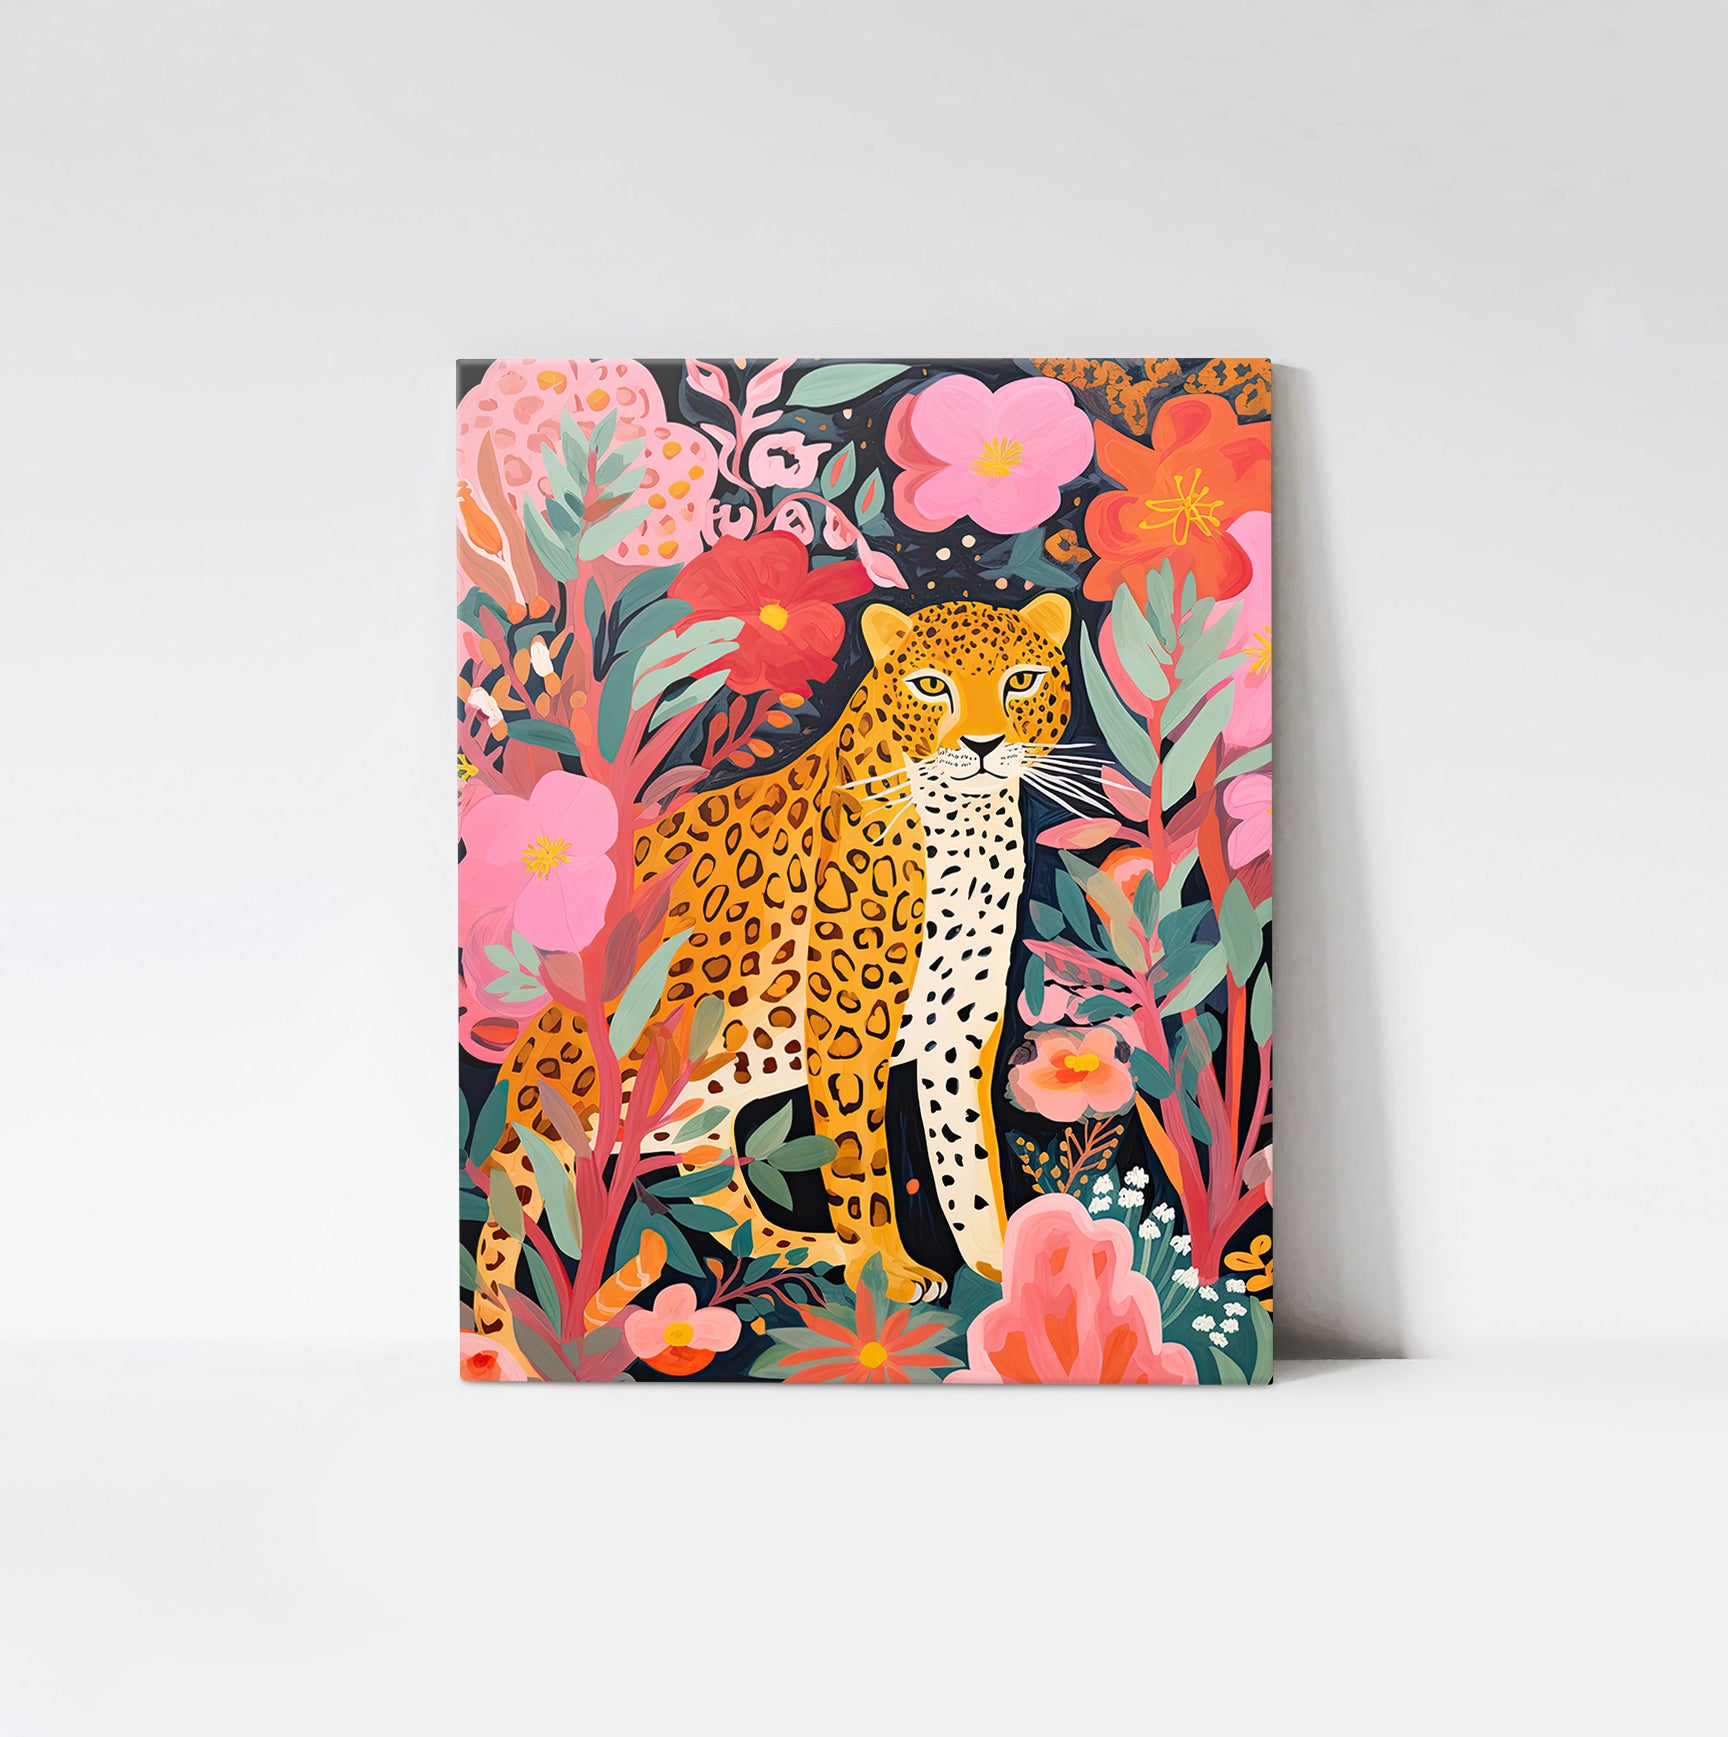 Art print of a leopard surrounded by colorful tropical foliage, displayed on a wood board, showcasing pink, green, and orange hues.